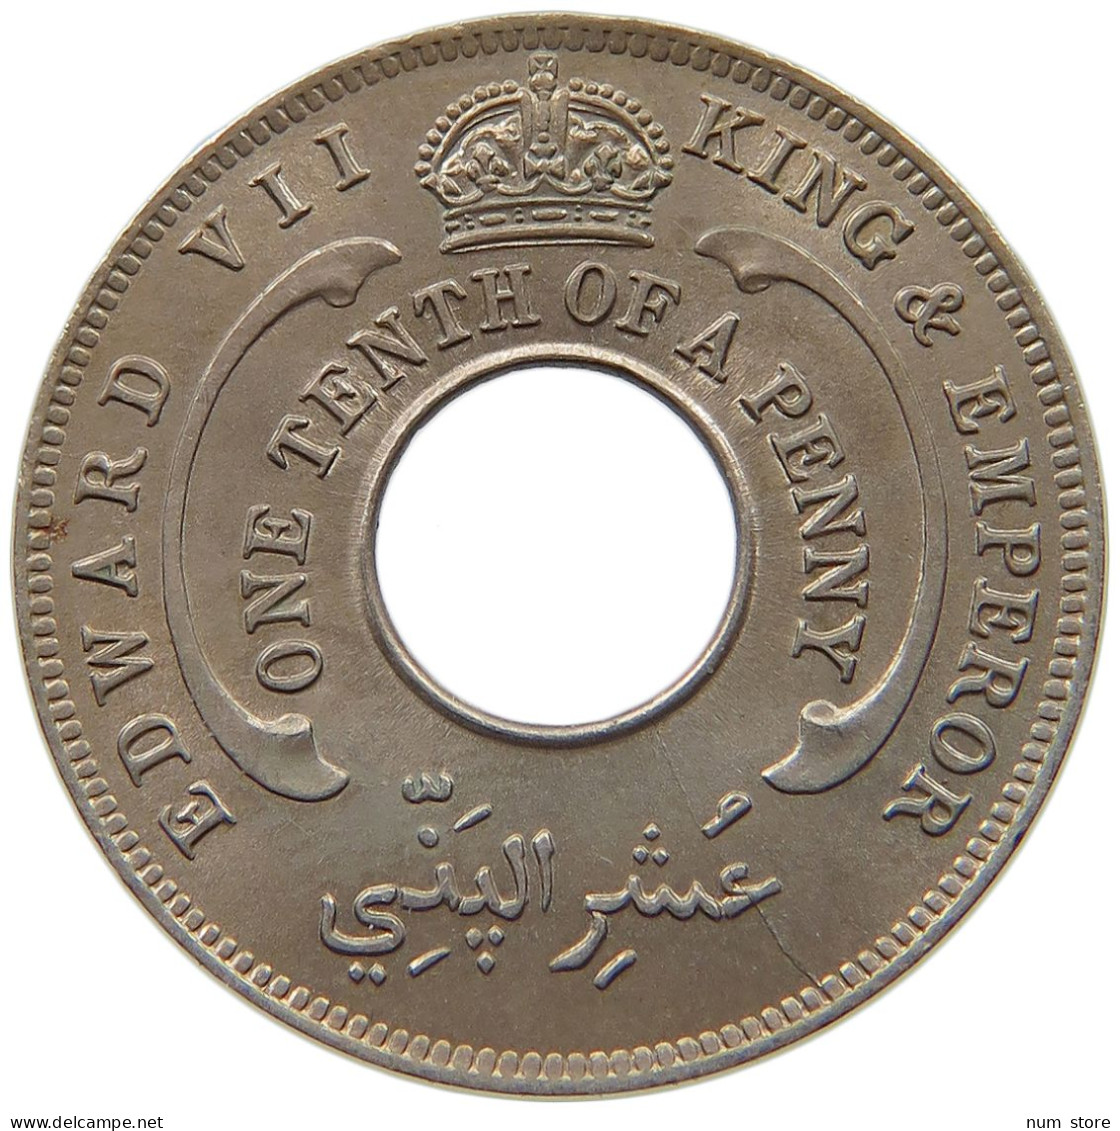 WEST AFRICA 1/10 PENNY 1908 Edward VII., 1901 - 1910 #t113 0175 - Collections